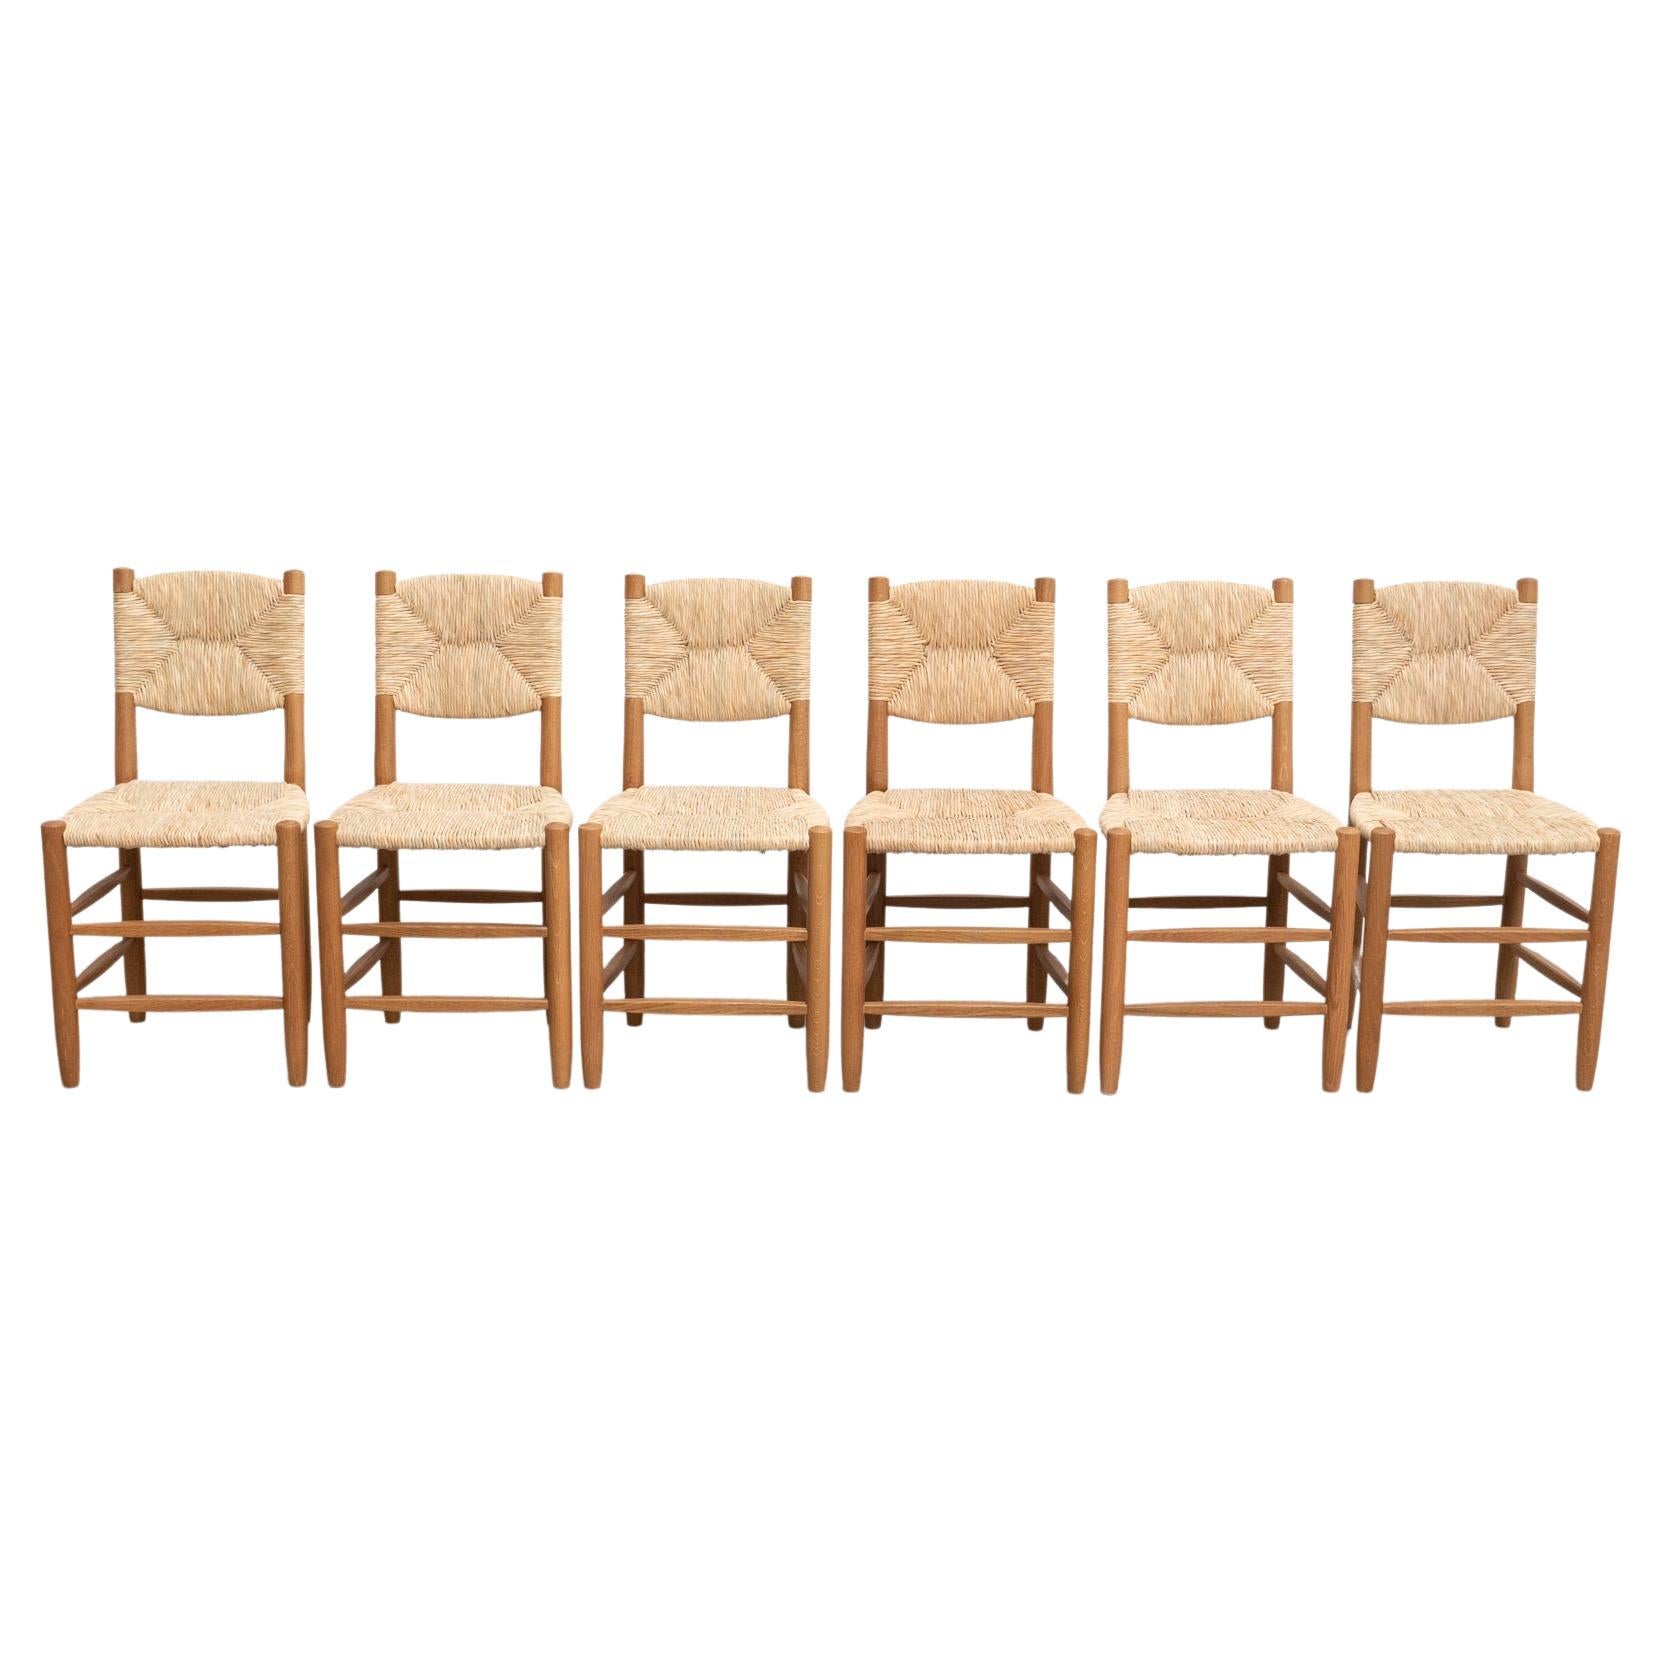 Set of 6 After Charlotte Perriand n.19 Chairs, Wood Rattan, Mid-Century Modern